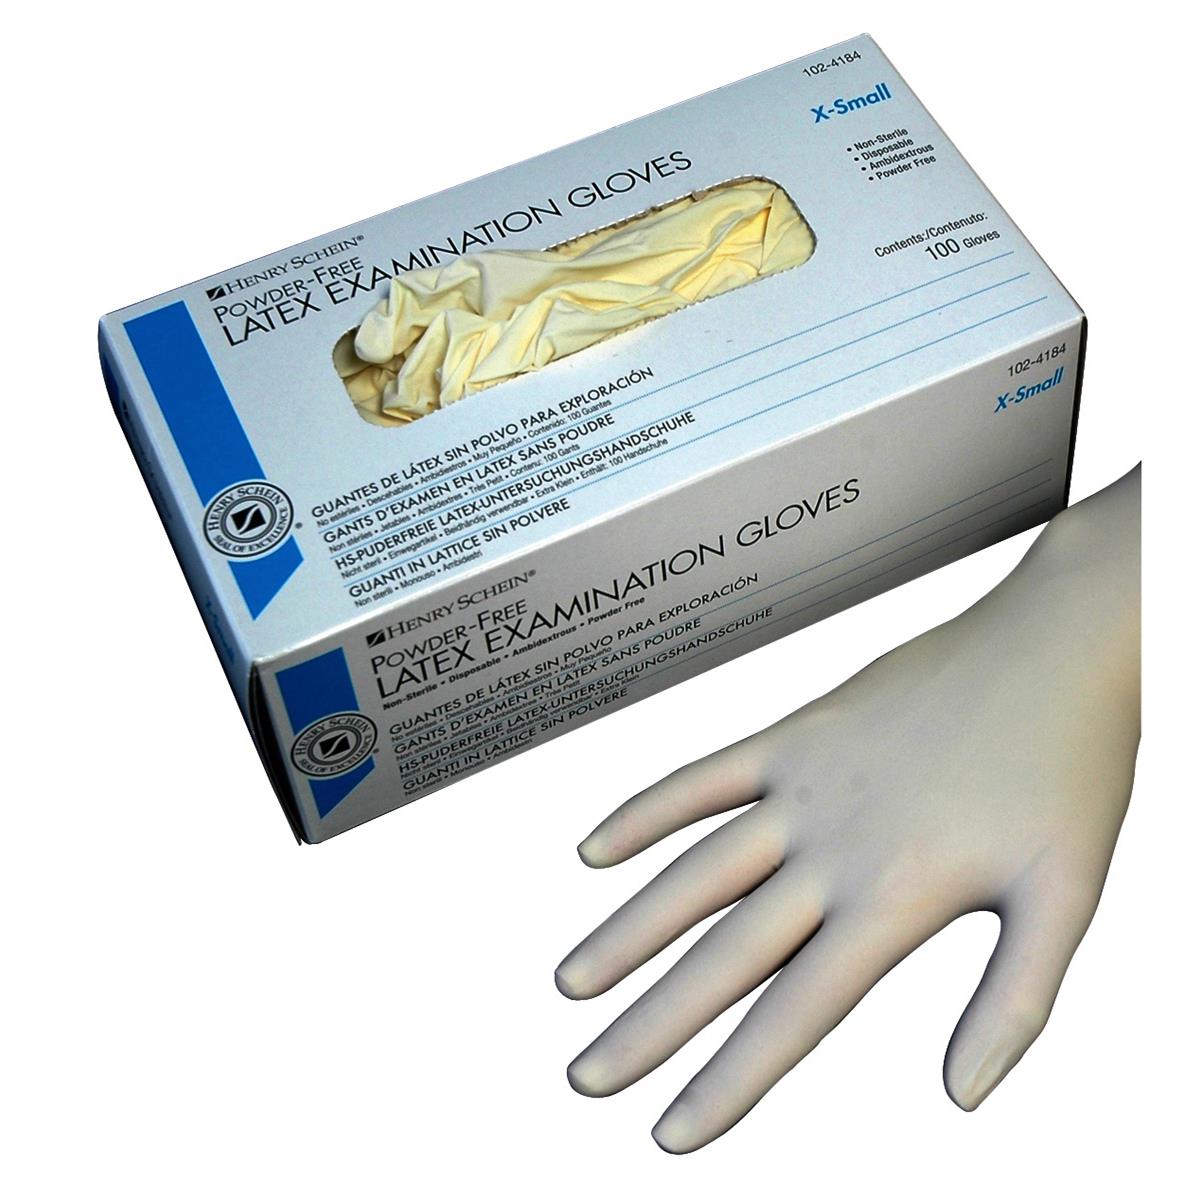 Criterion Gloves Latex Powder-Free Extra Small 100pk